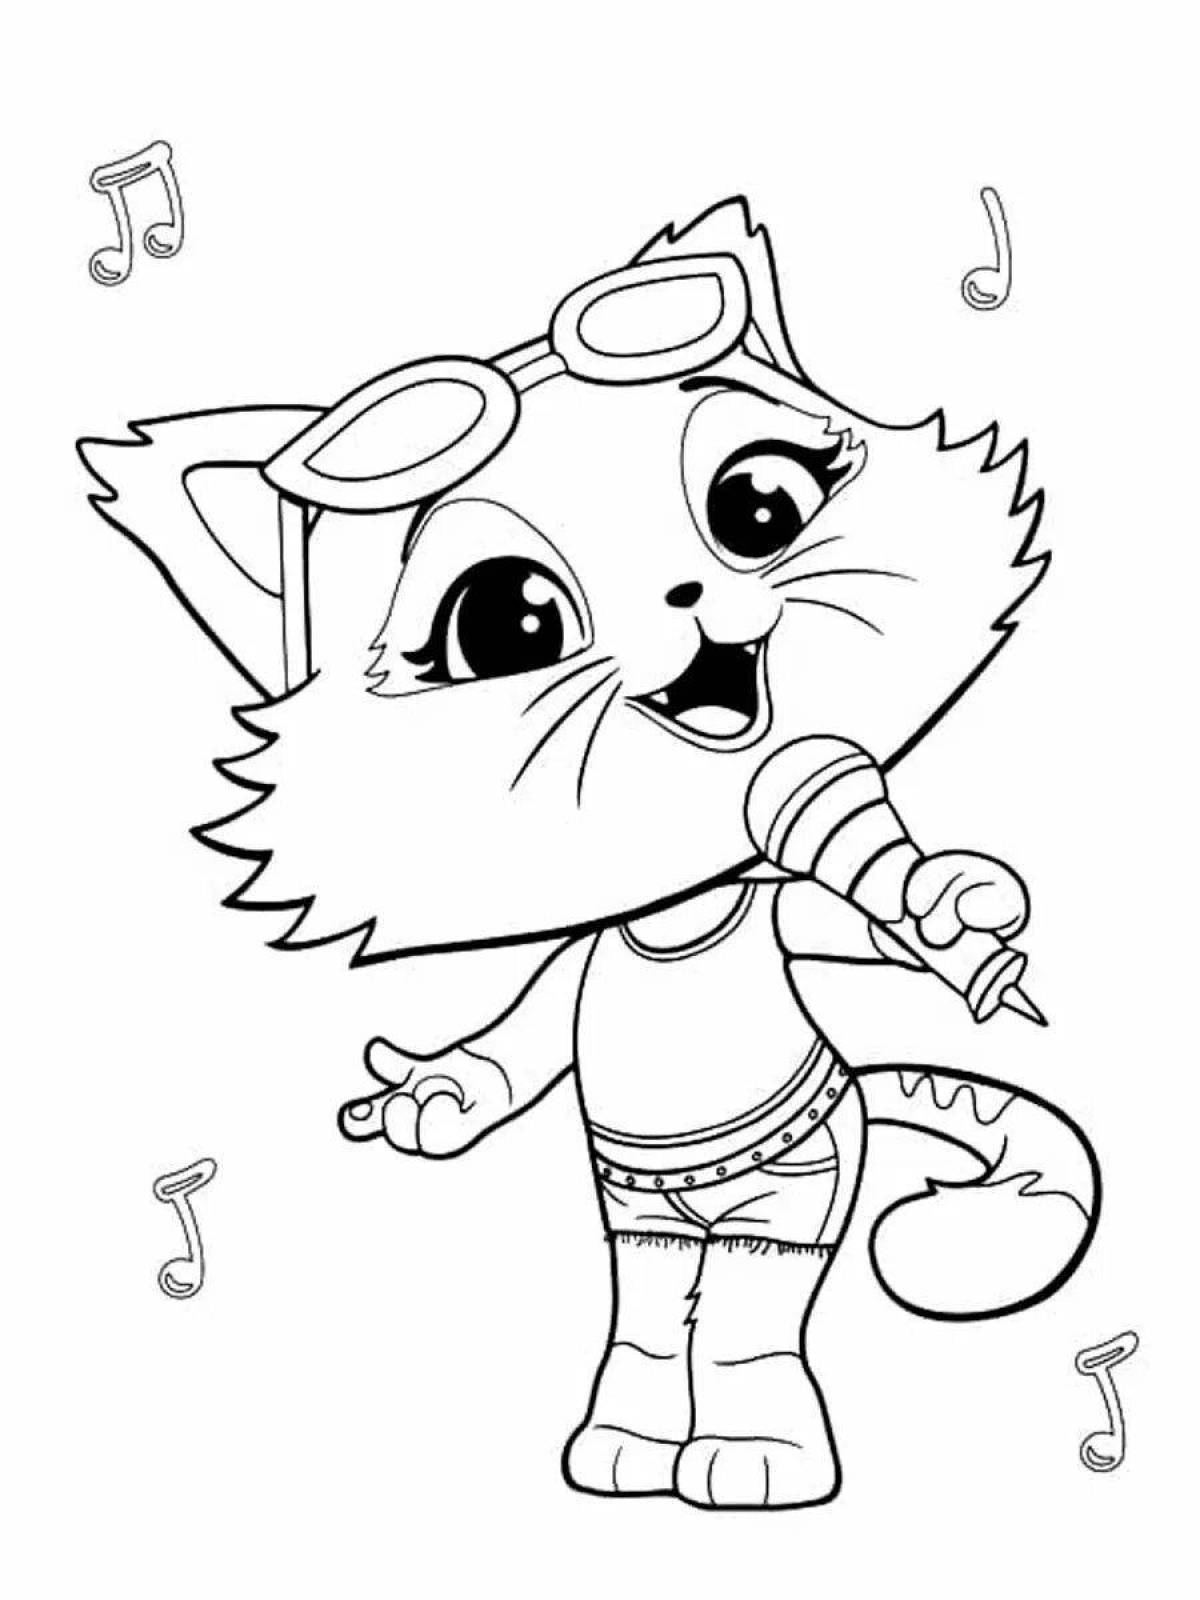 Animated cats and dogs coloring book